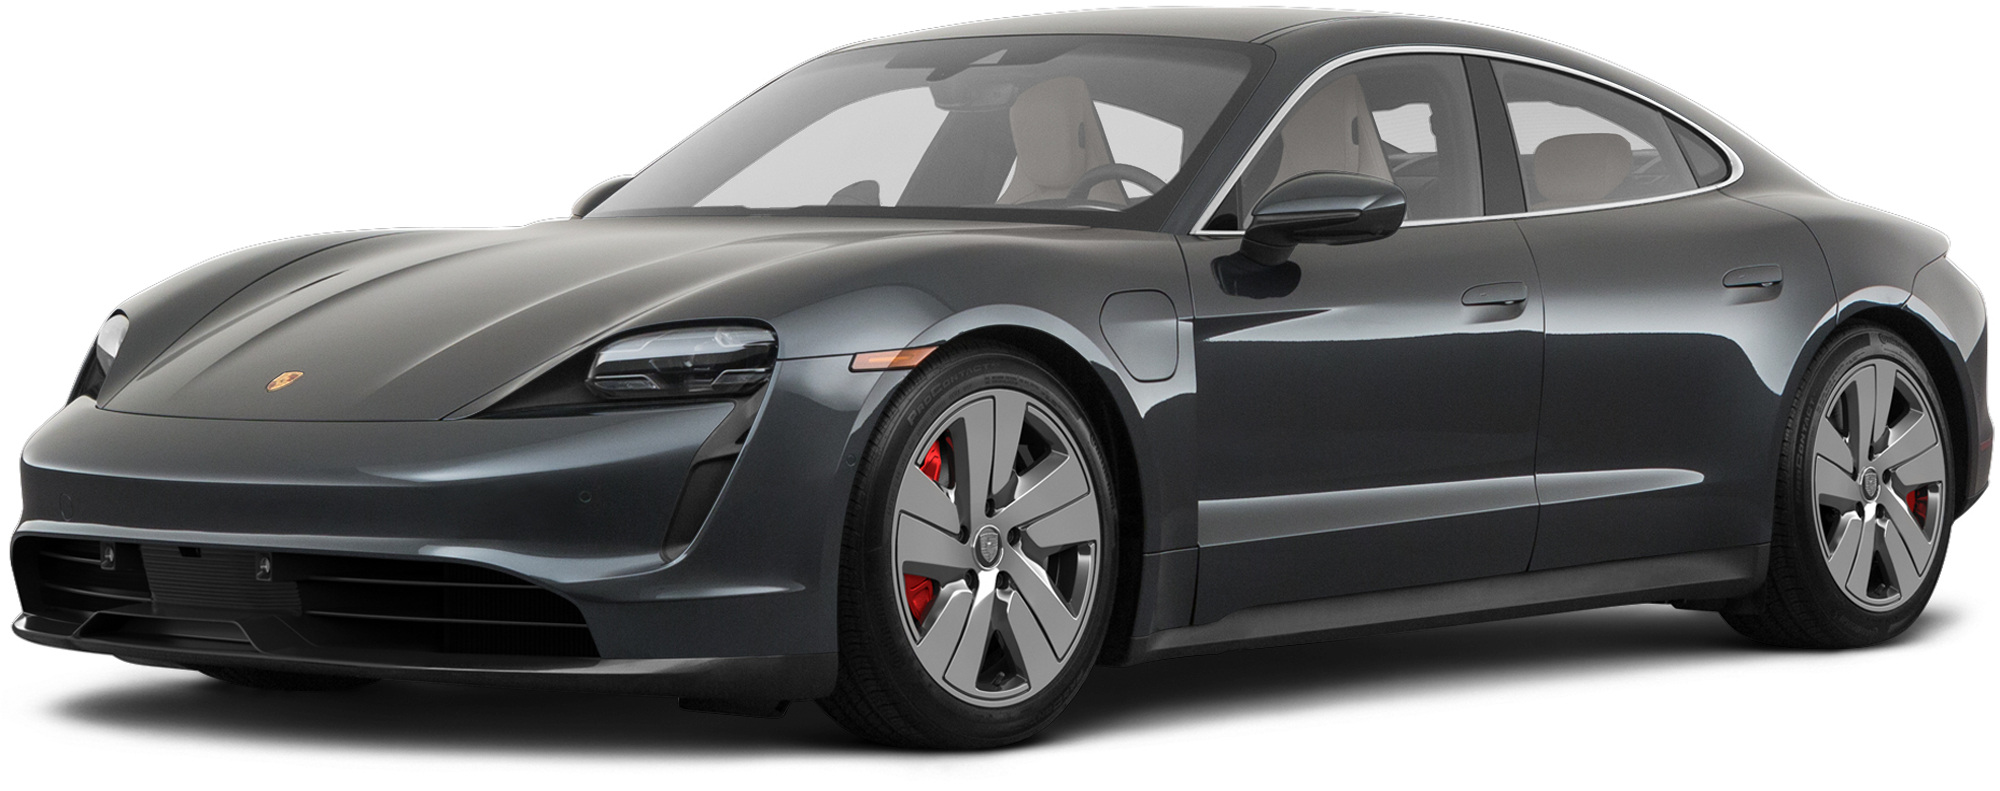 The base Porsche Taycan has rear-wheel drive and an $81,250 price